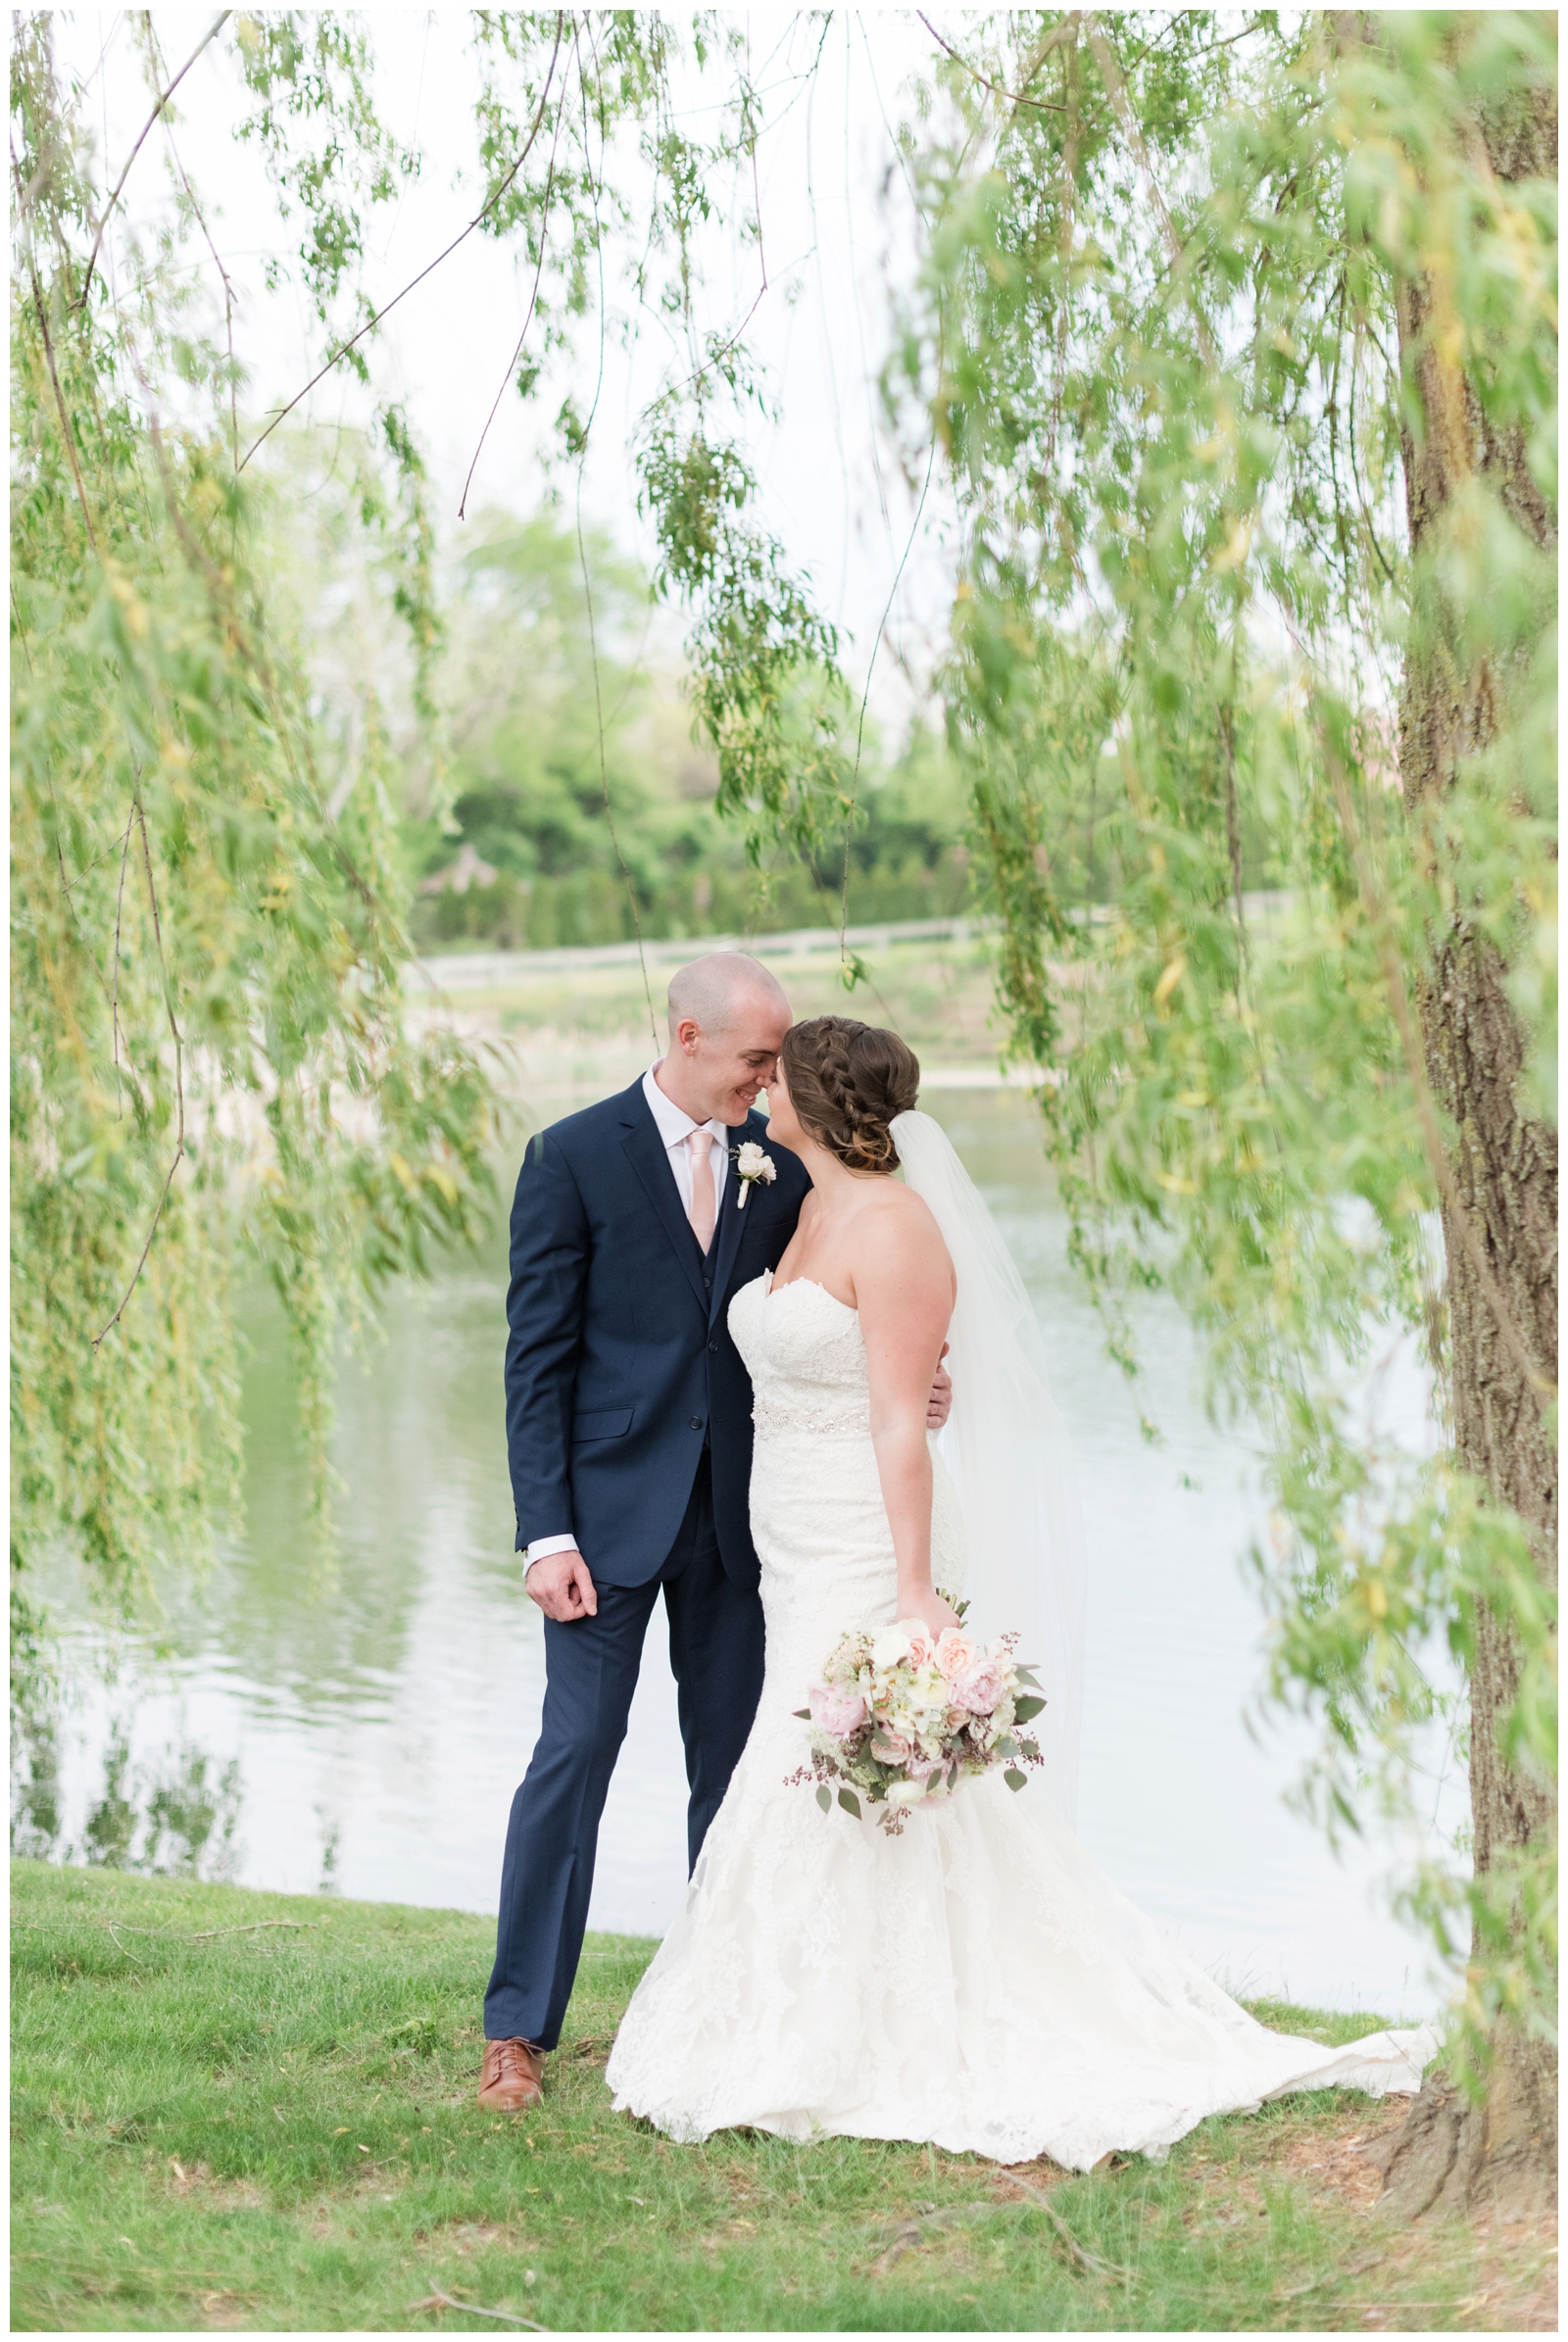 bride and groom nuzzle noses while bride holds wedding bouquet of pink and white flowers under willow tree by lake